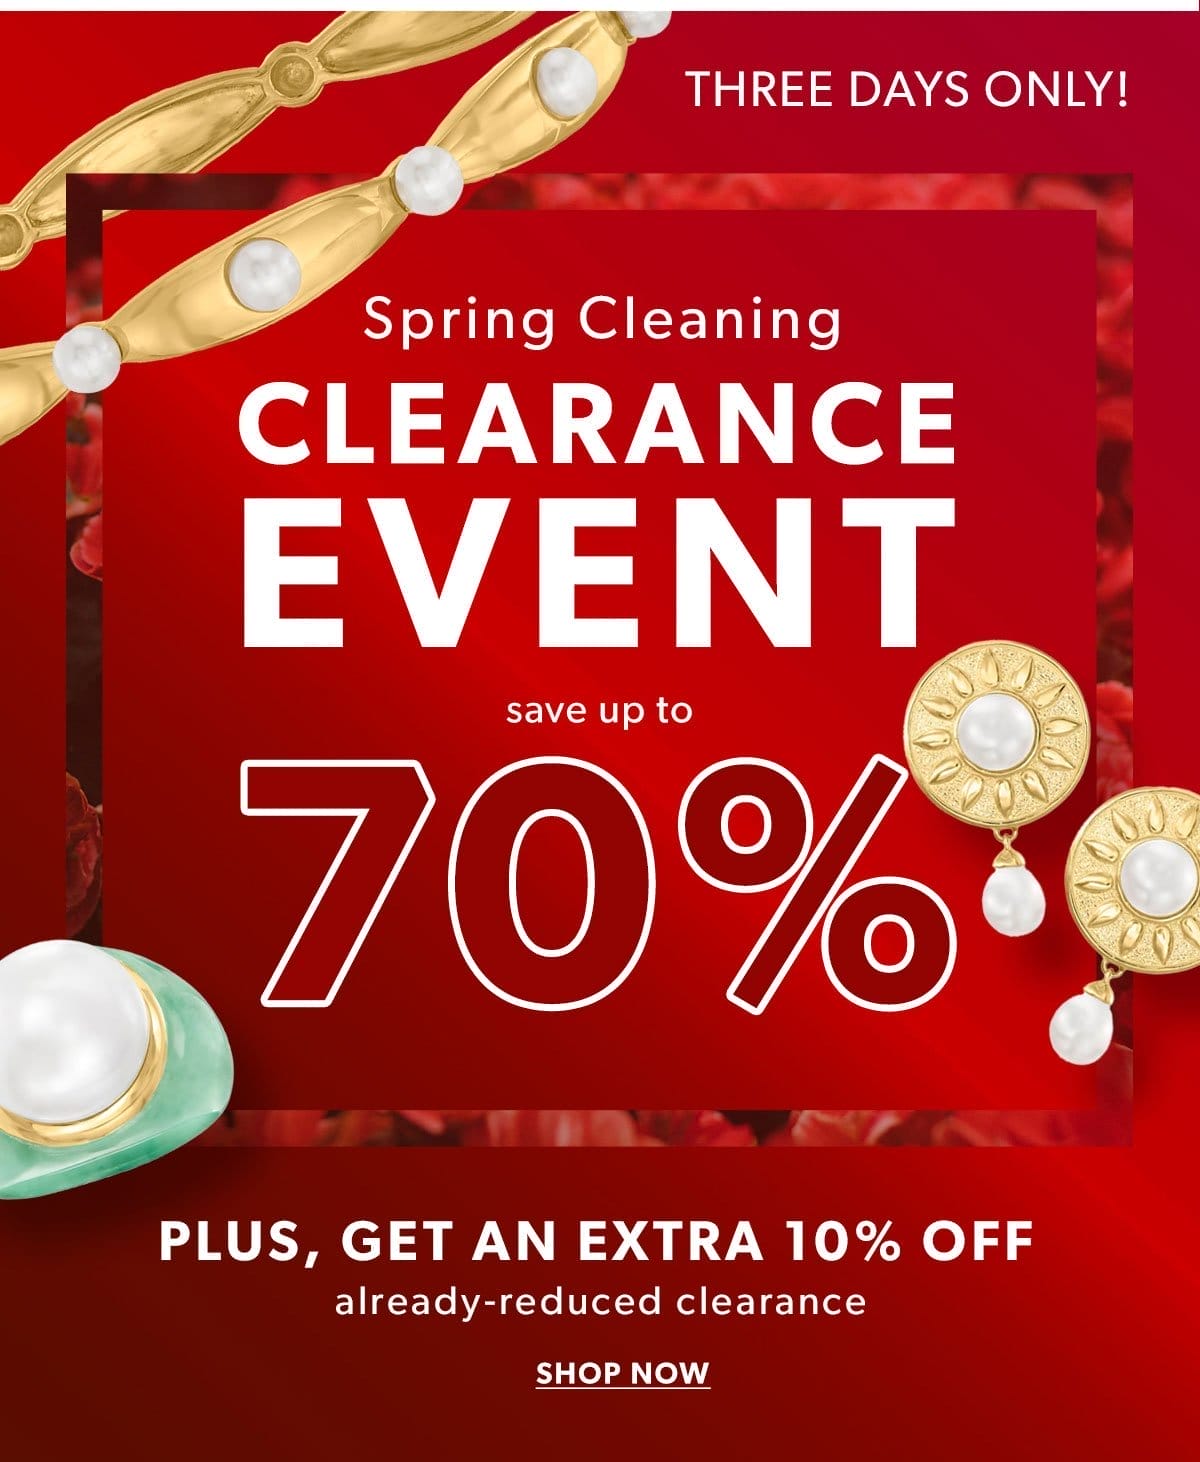 Spring Cleaning Clearance Event. Save Up To 70% Plus, Get an Extra 10% Off Already-Reduced Clearance